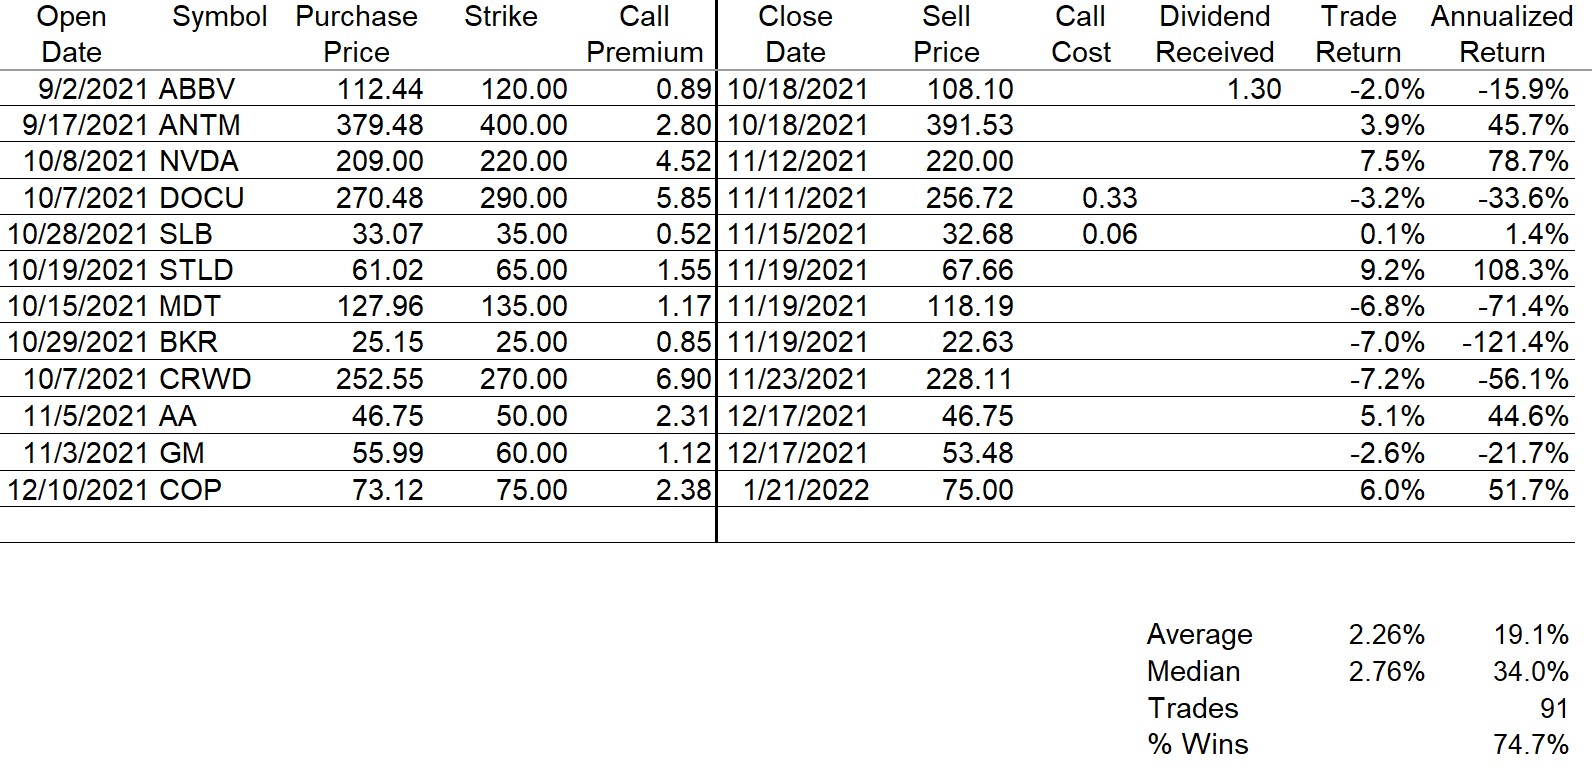 Closed Covered Call Trades